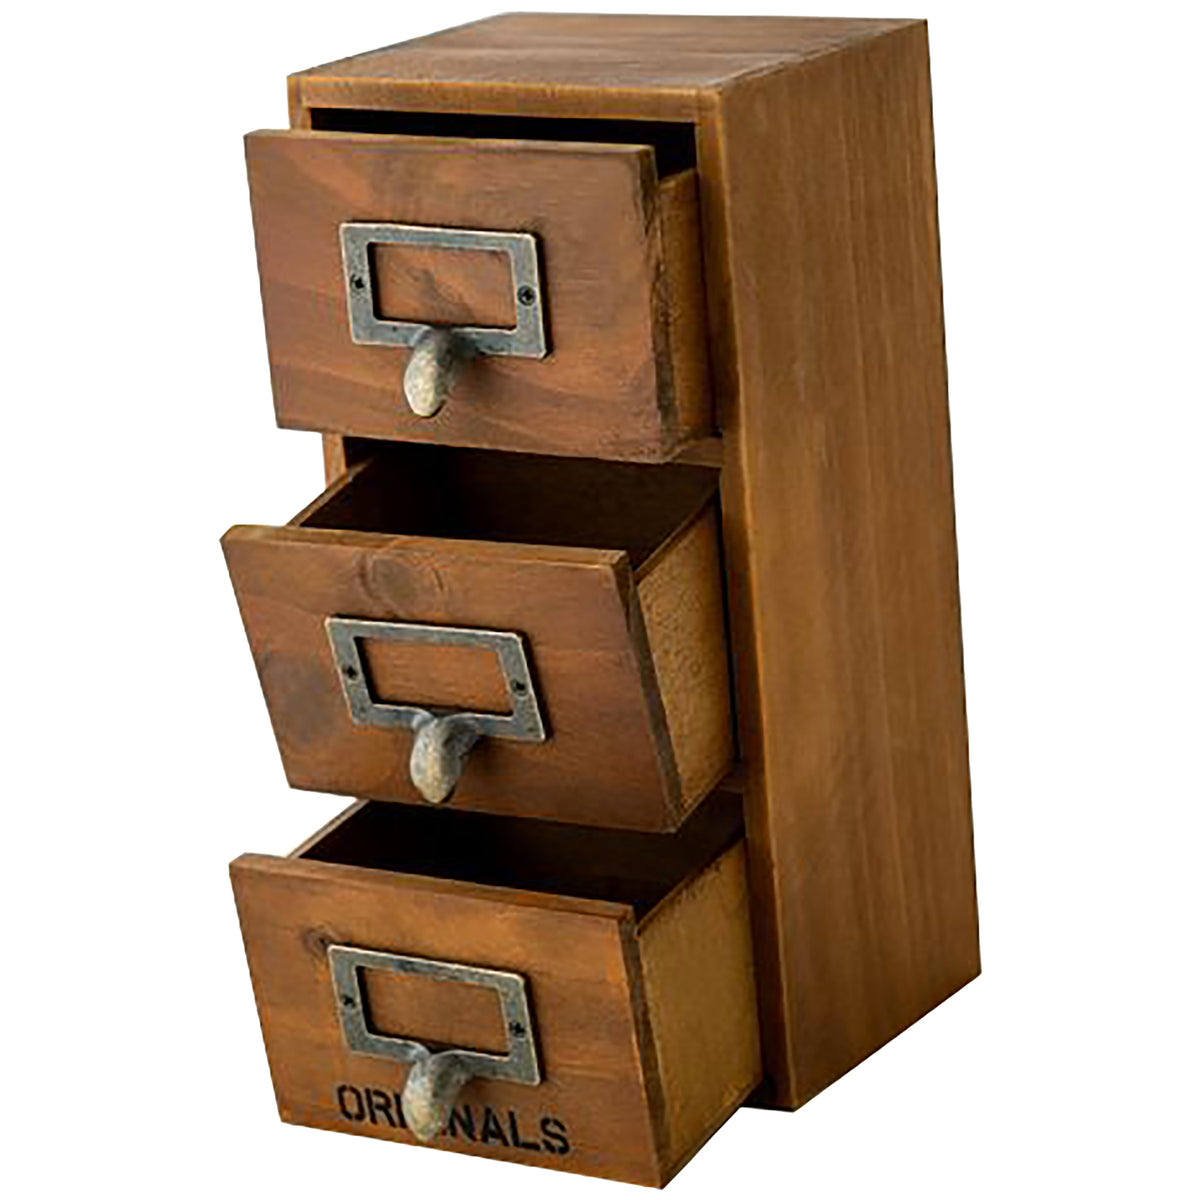 2-Drawer Mini Multi-level Desktop Storage Shelf  Small Tabletop Chest –  Primo Supply l Curated Problem Solving Products